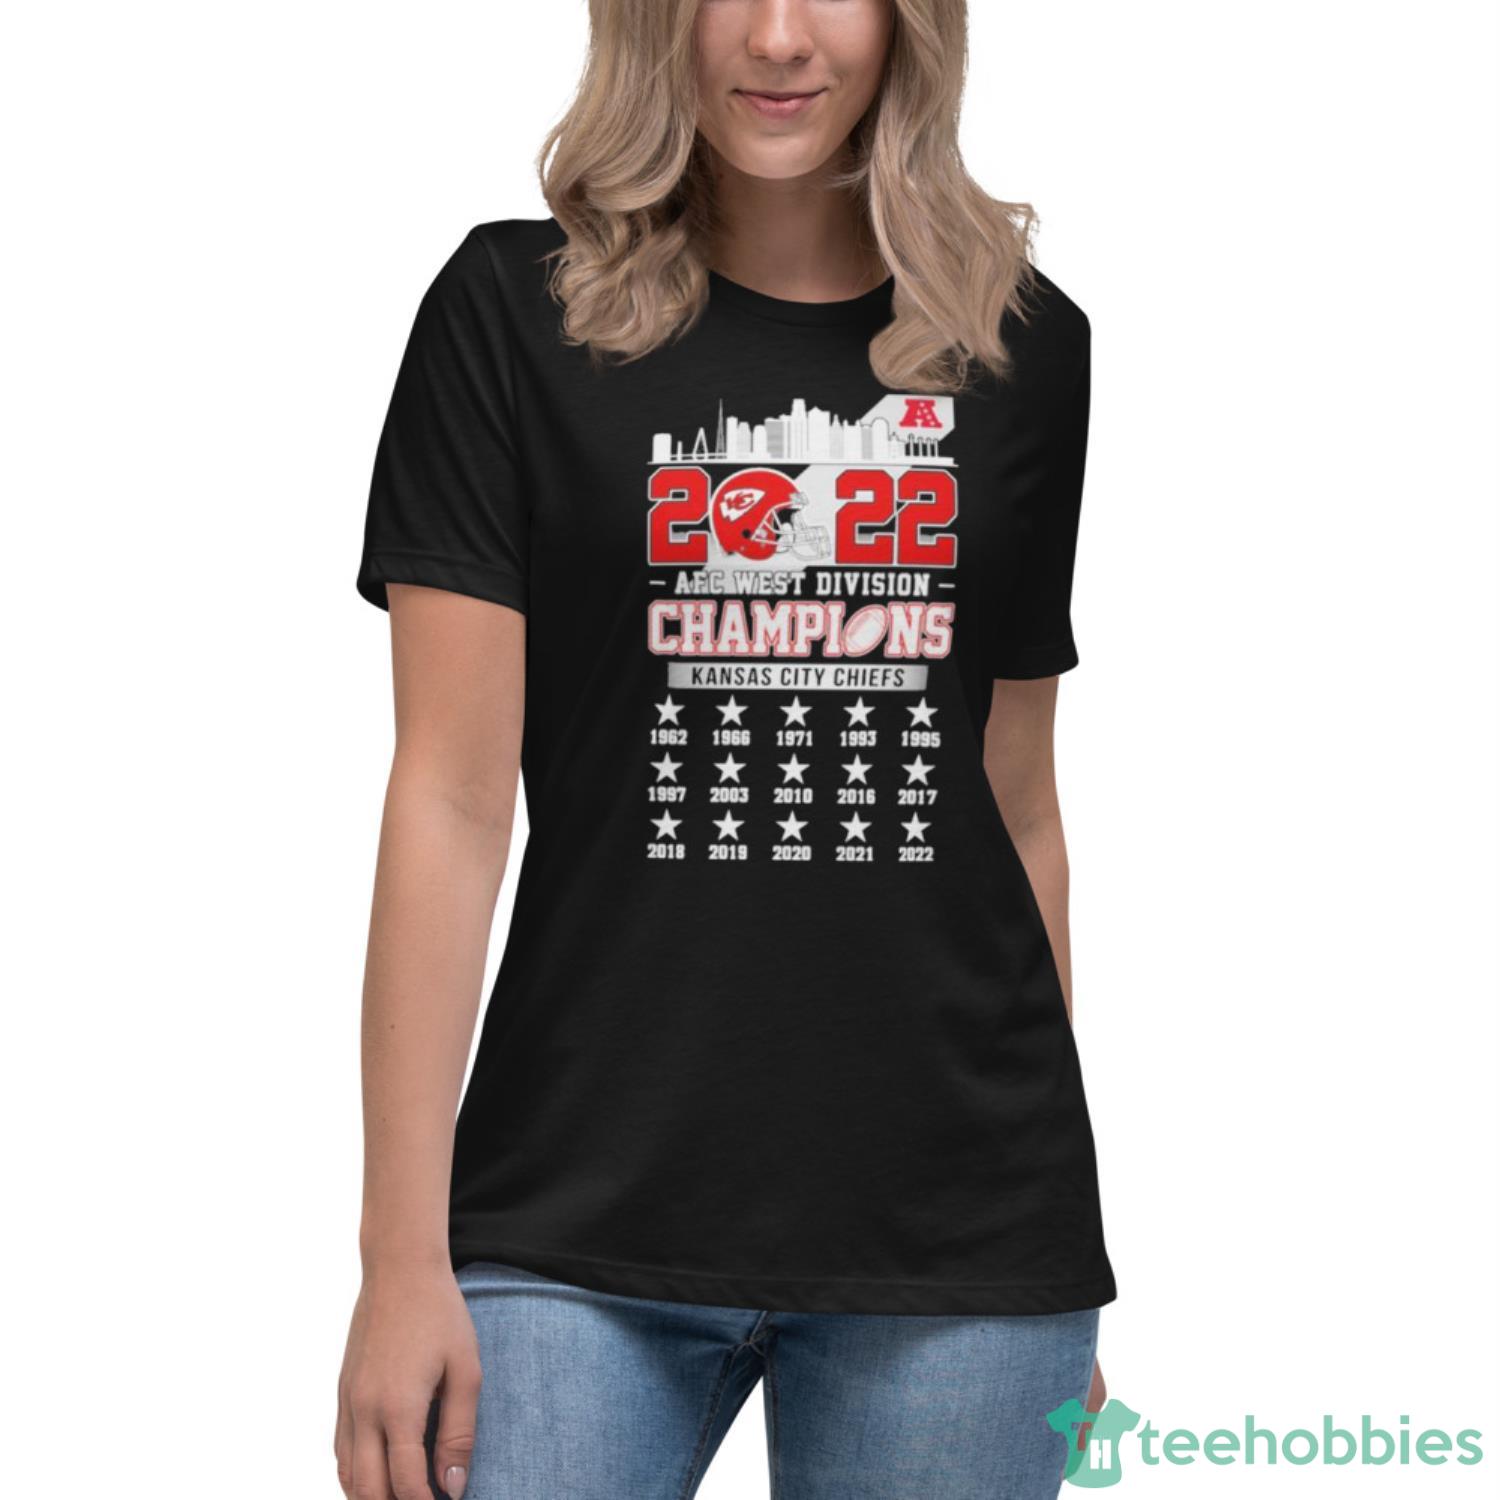 2022 AFC West Division Champion Kansas City Chiefs 1962 2021 2022 shirt - Womens Relaxed Short Sleeve Jersey Tee